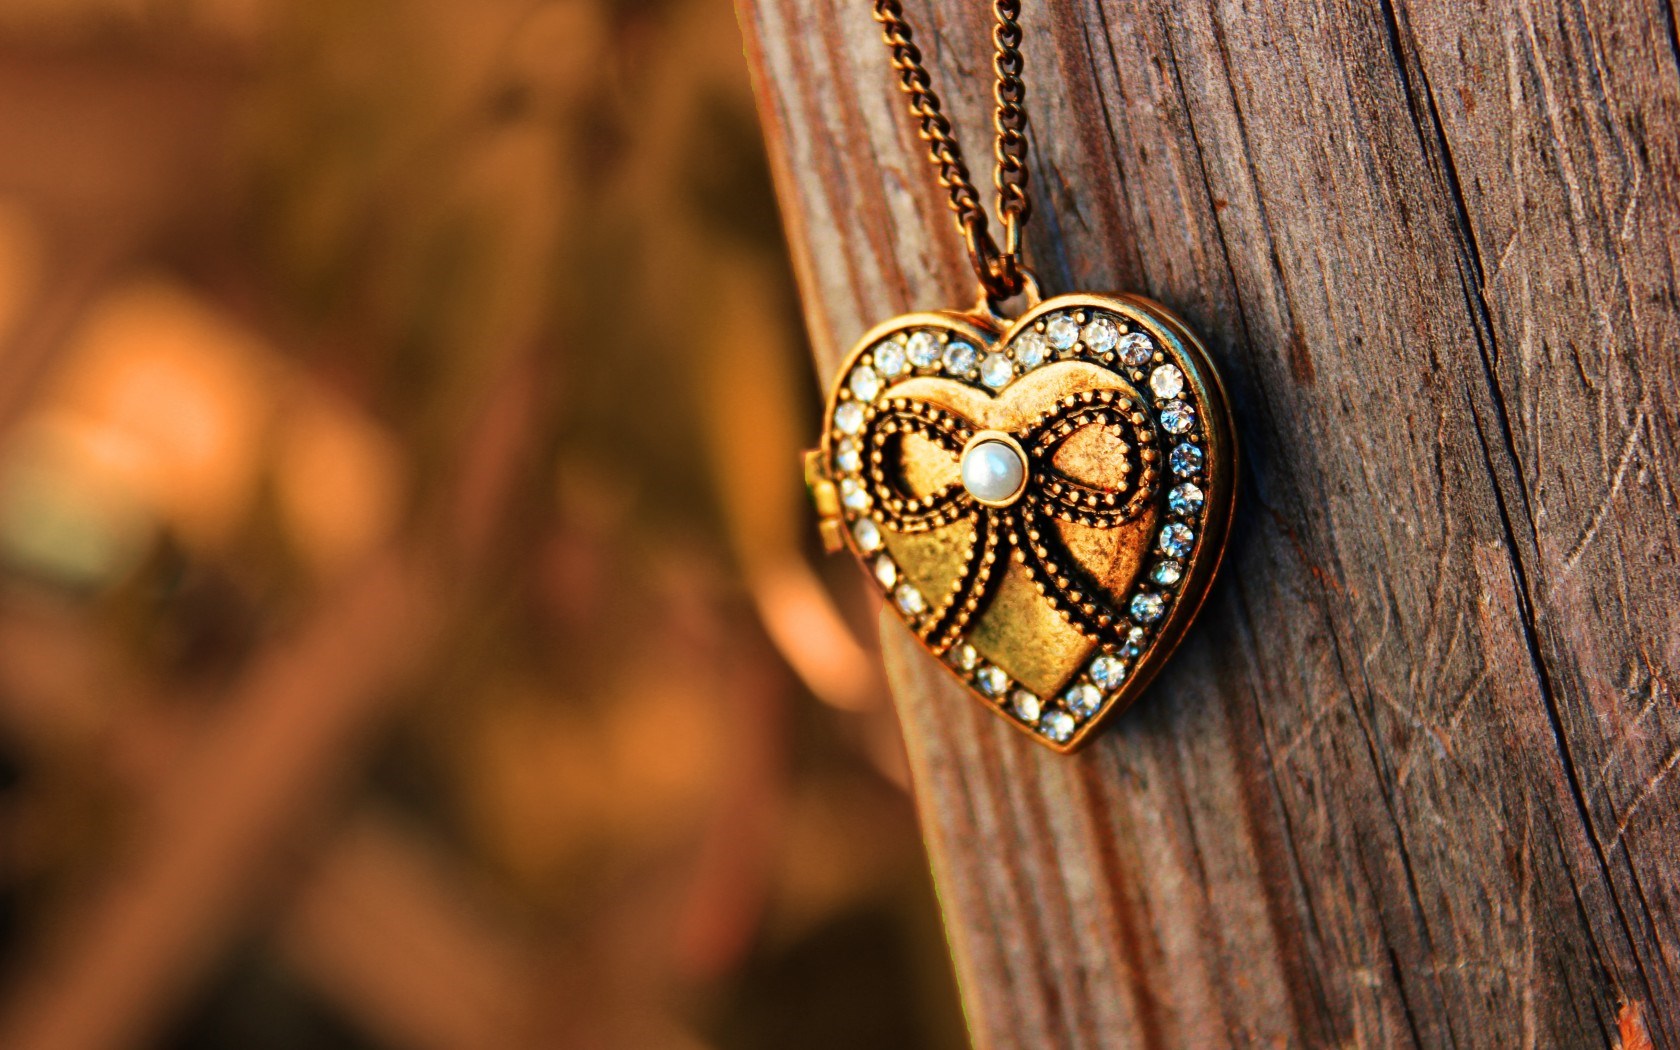 HD wallpaper: man and woman photos in gold heart locket pendant chain  necklace | Wallpaper Flare